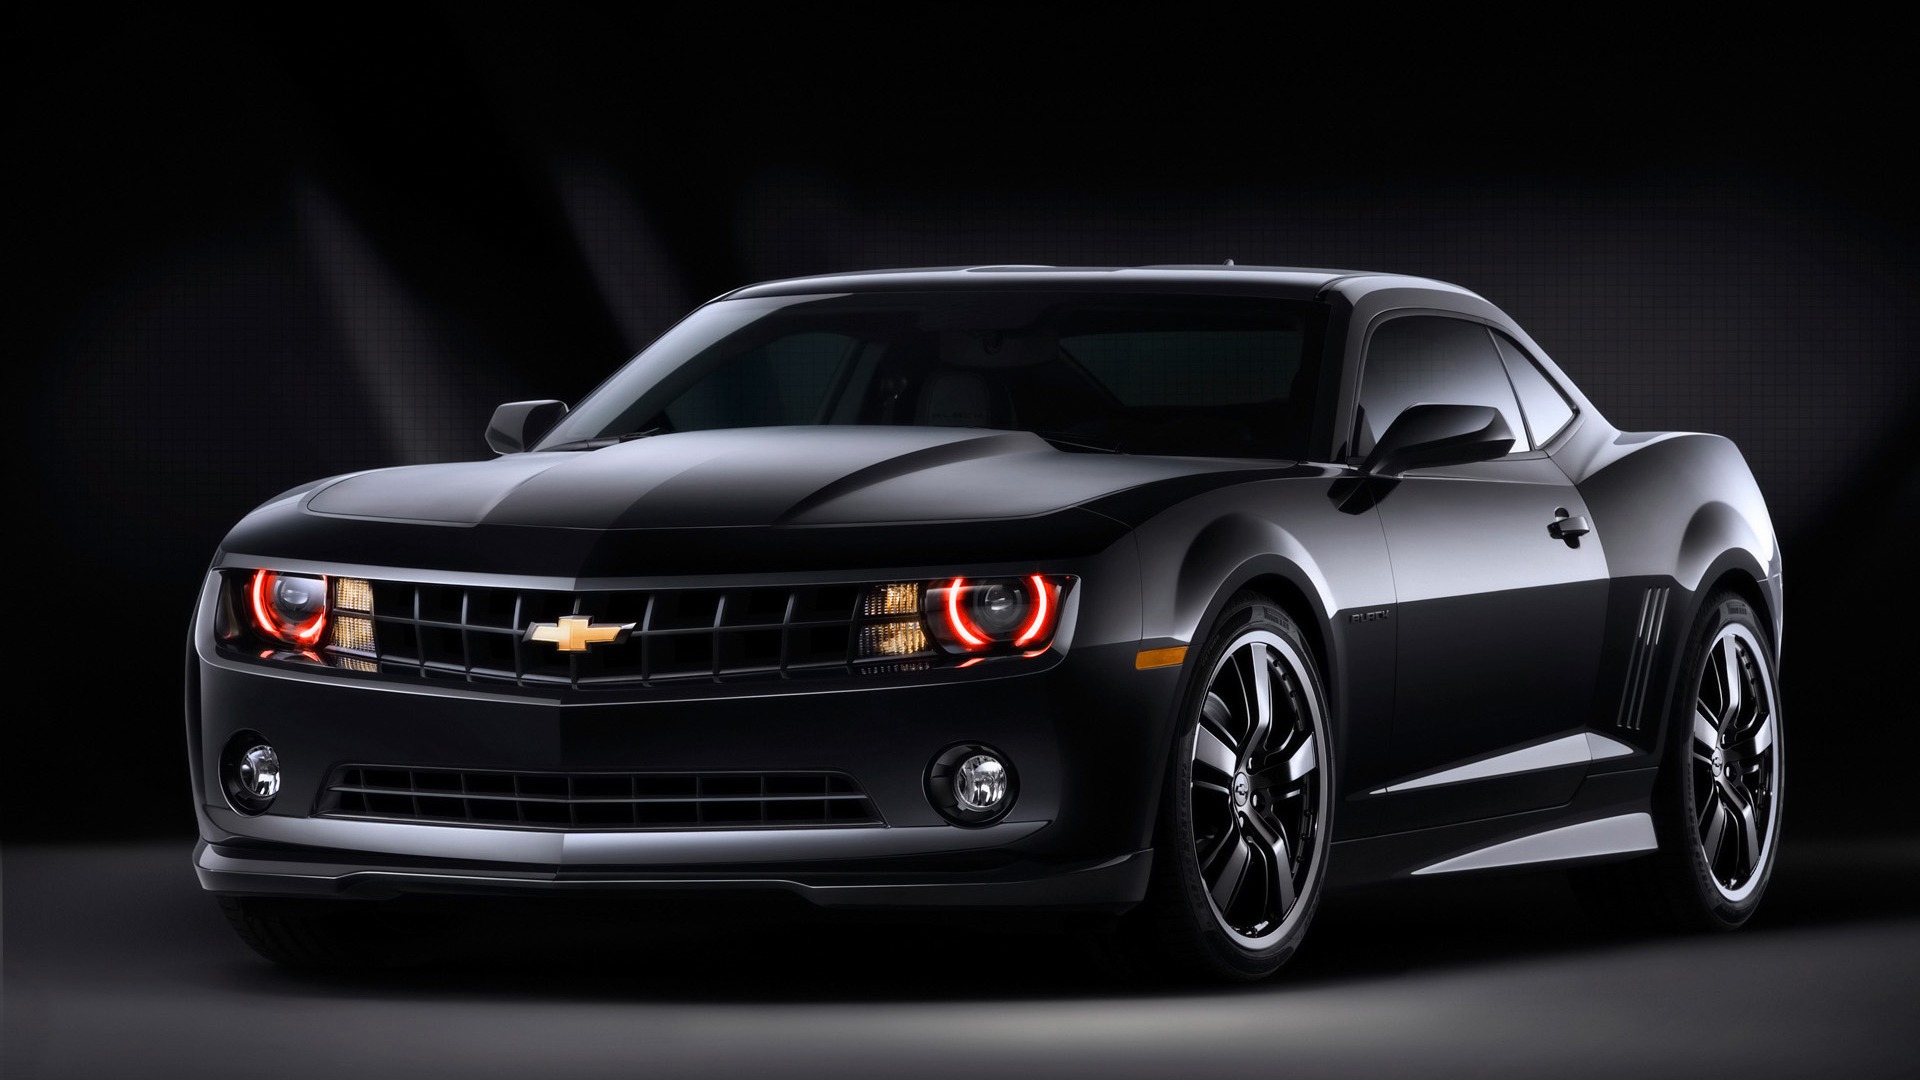 Cars widescreen hd Wallpapers 1080p Background HD Wallpaper for